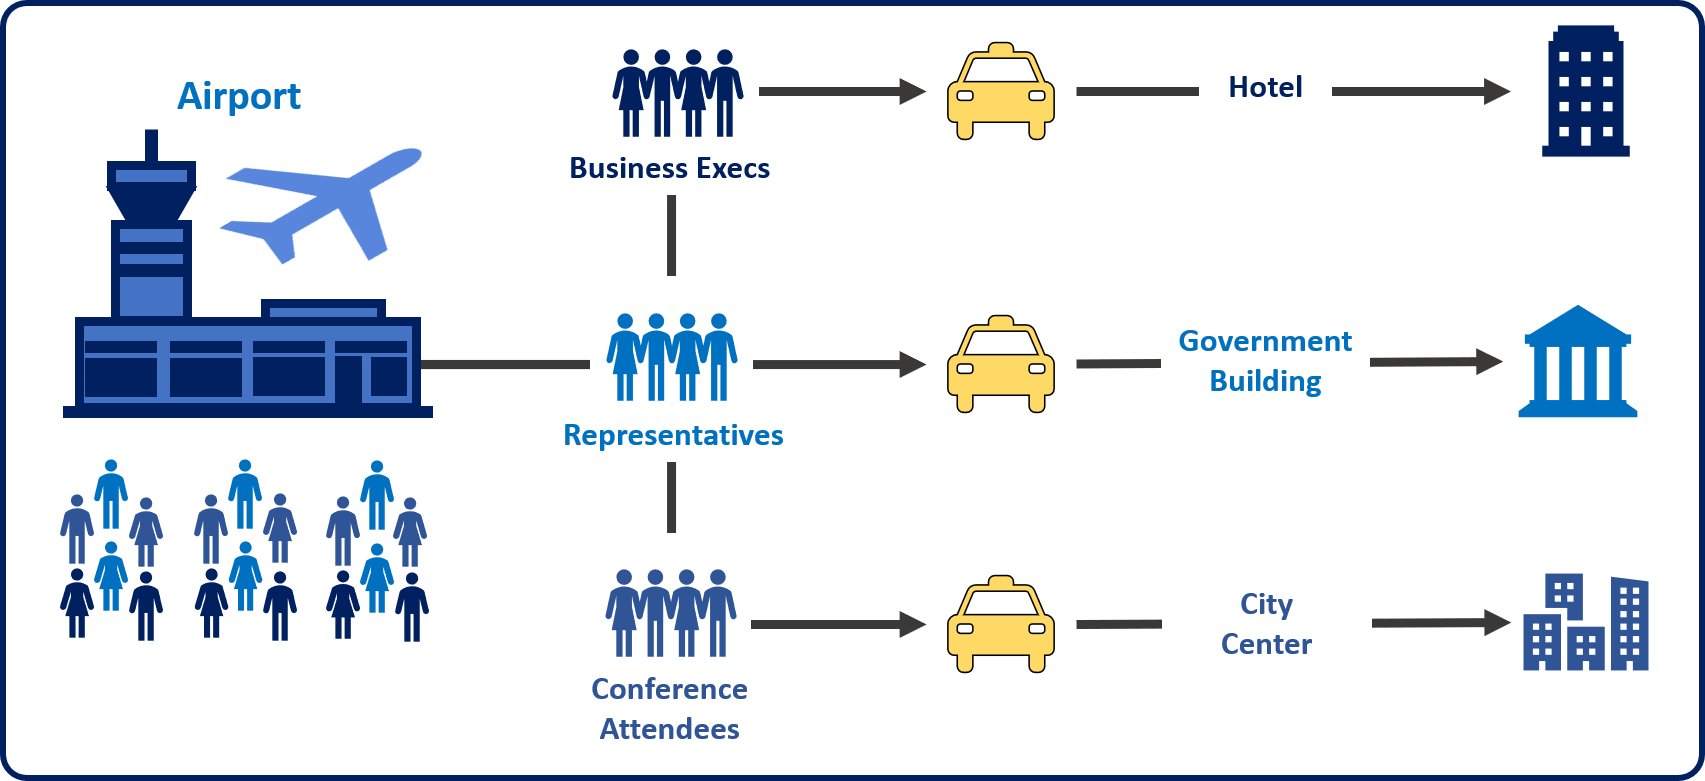 Diagram example of a queue system with cabs and airport travelers.